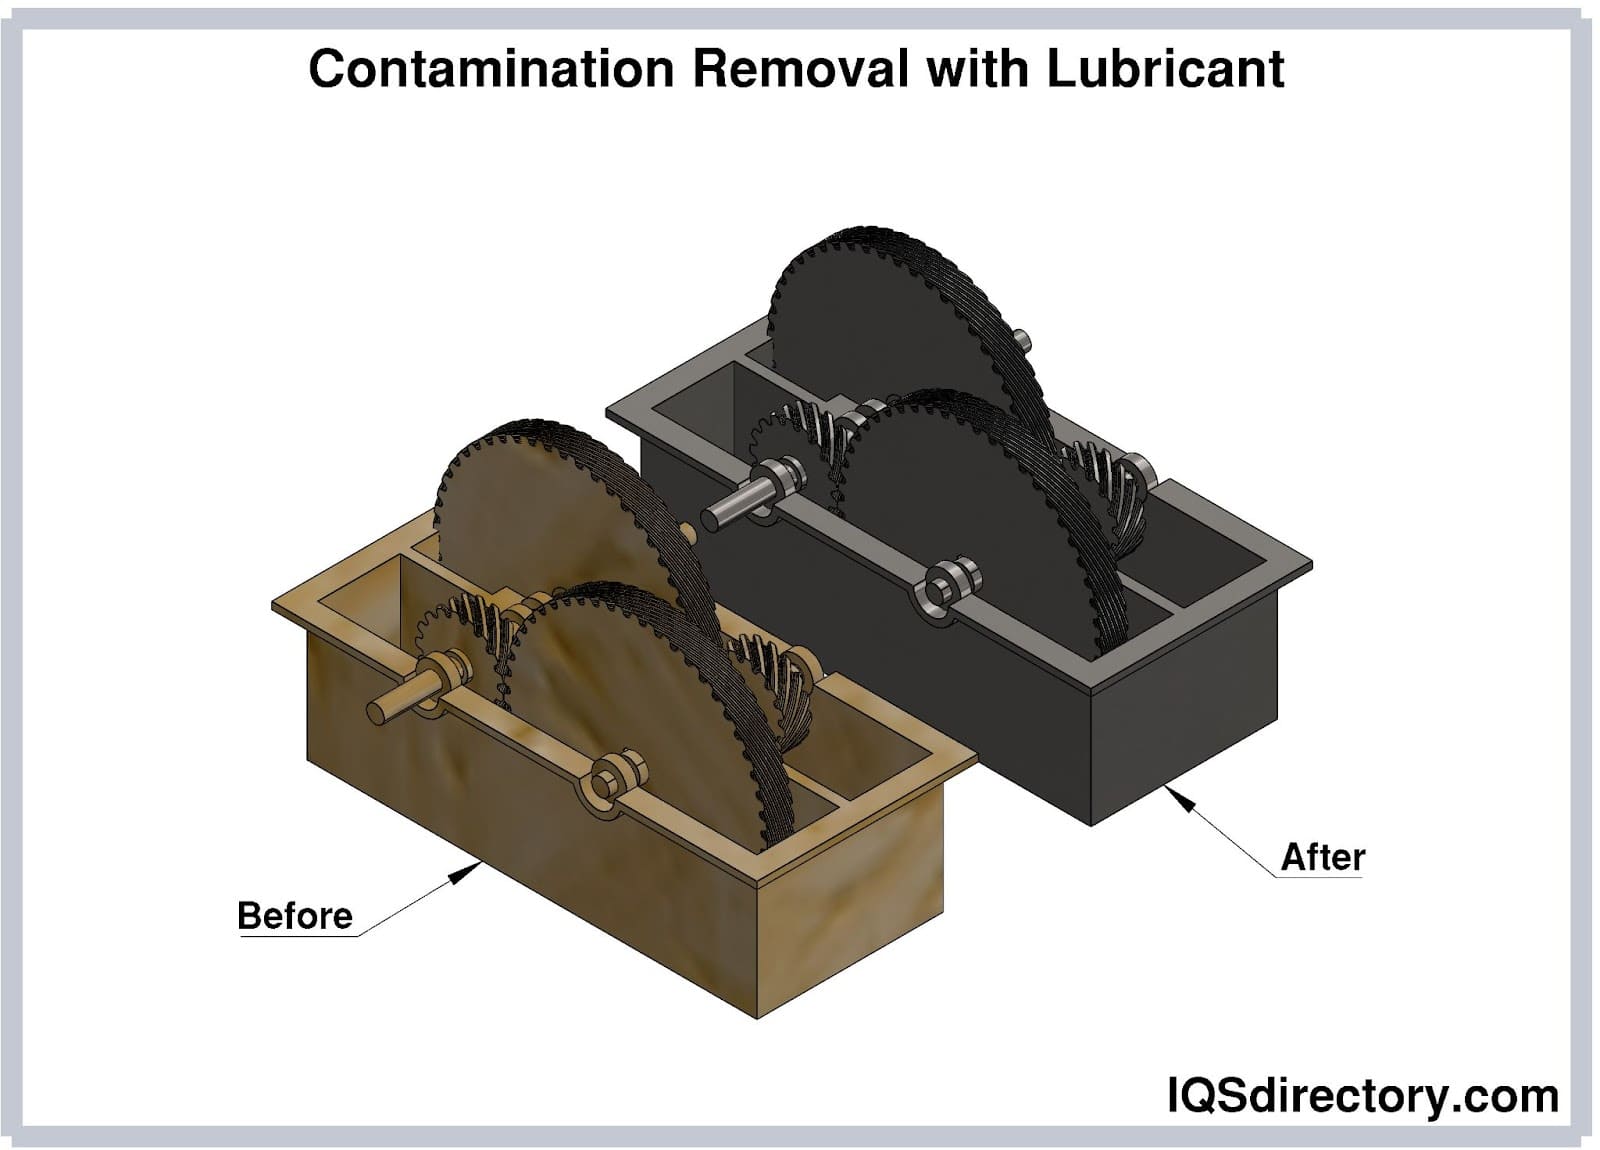 Contamination Removal with Lubricant